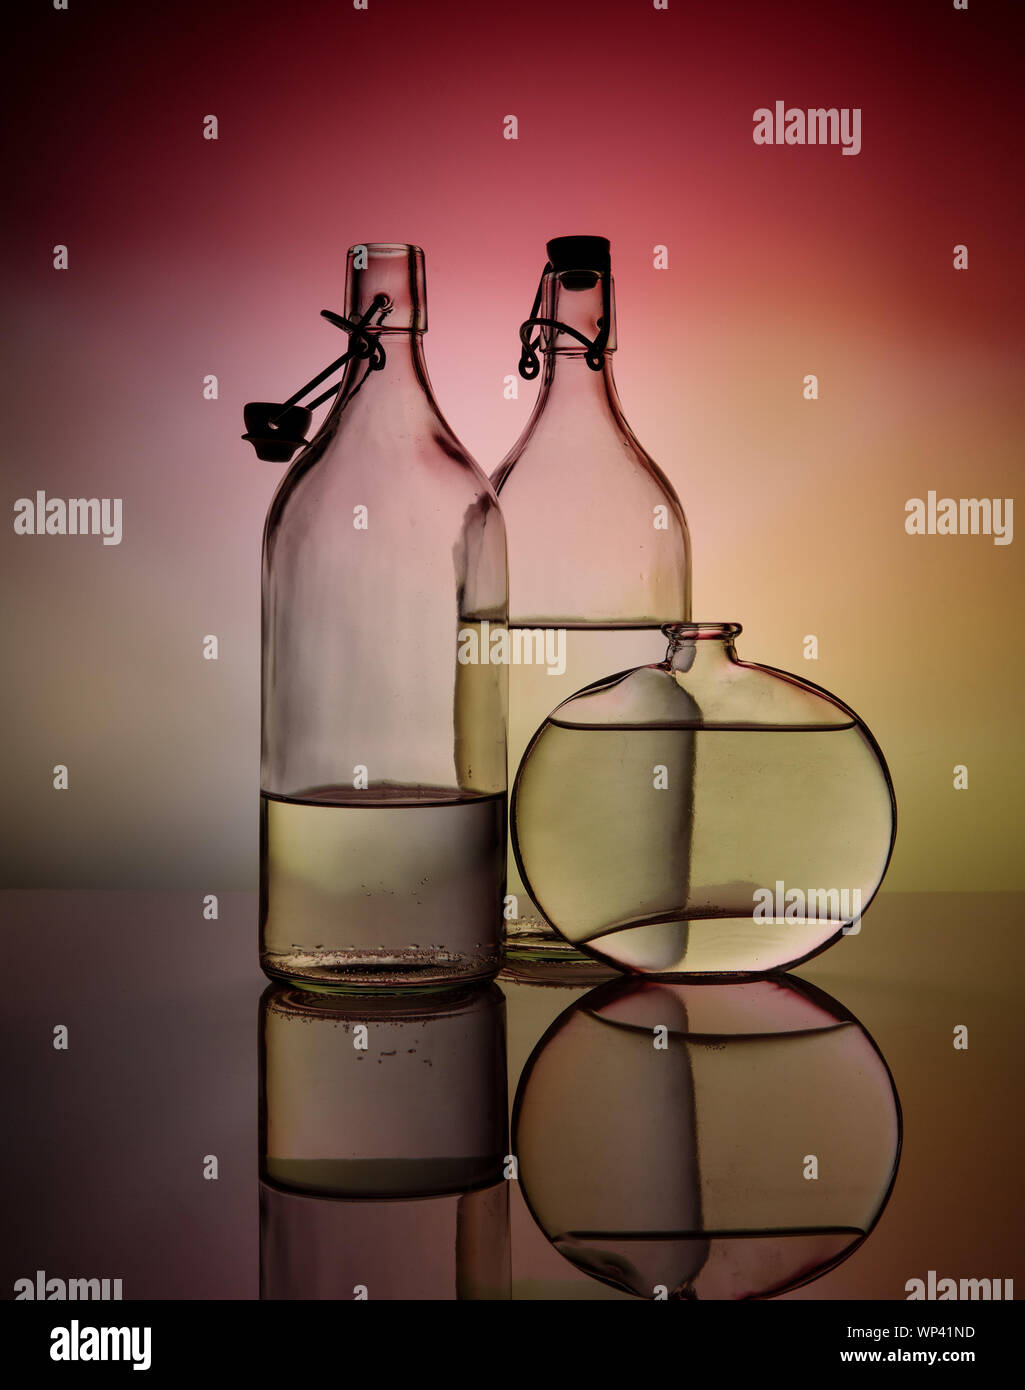 Variants of Still Life with Glass Bottles Stock Photo